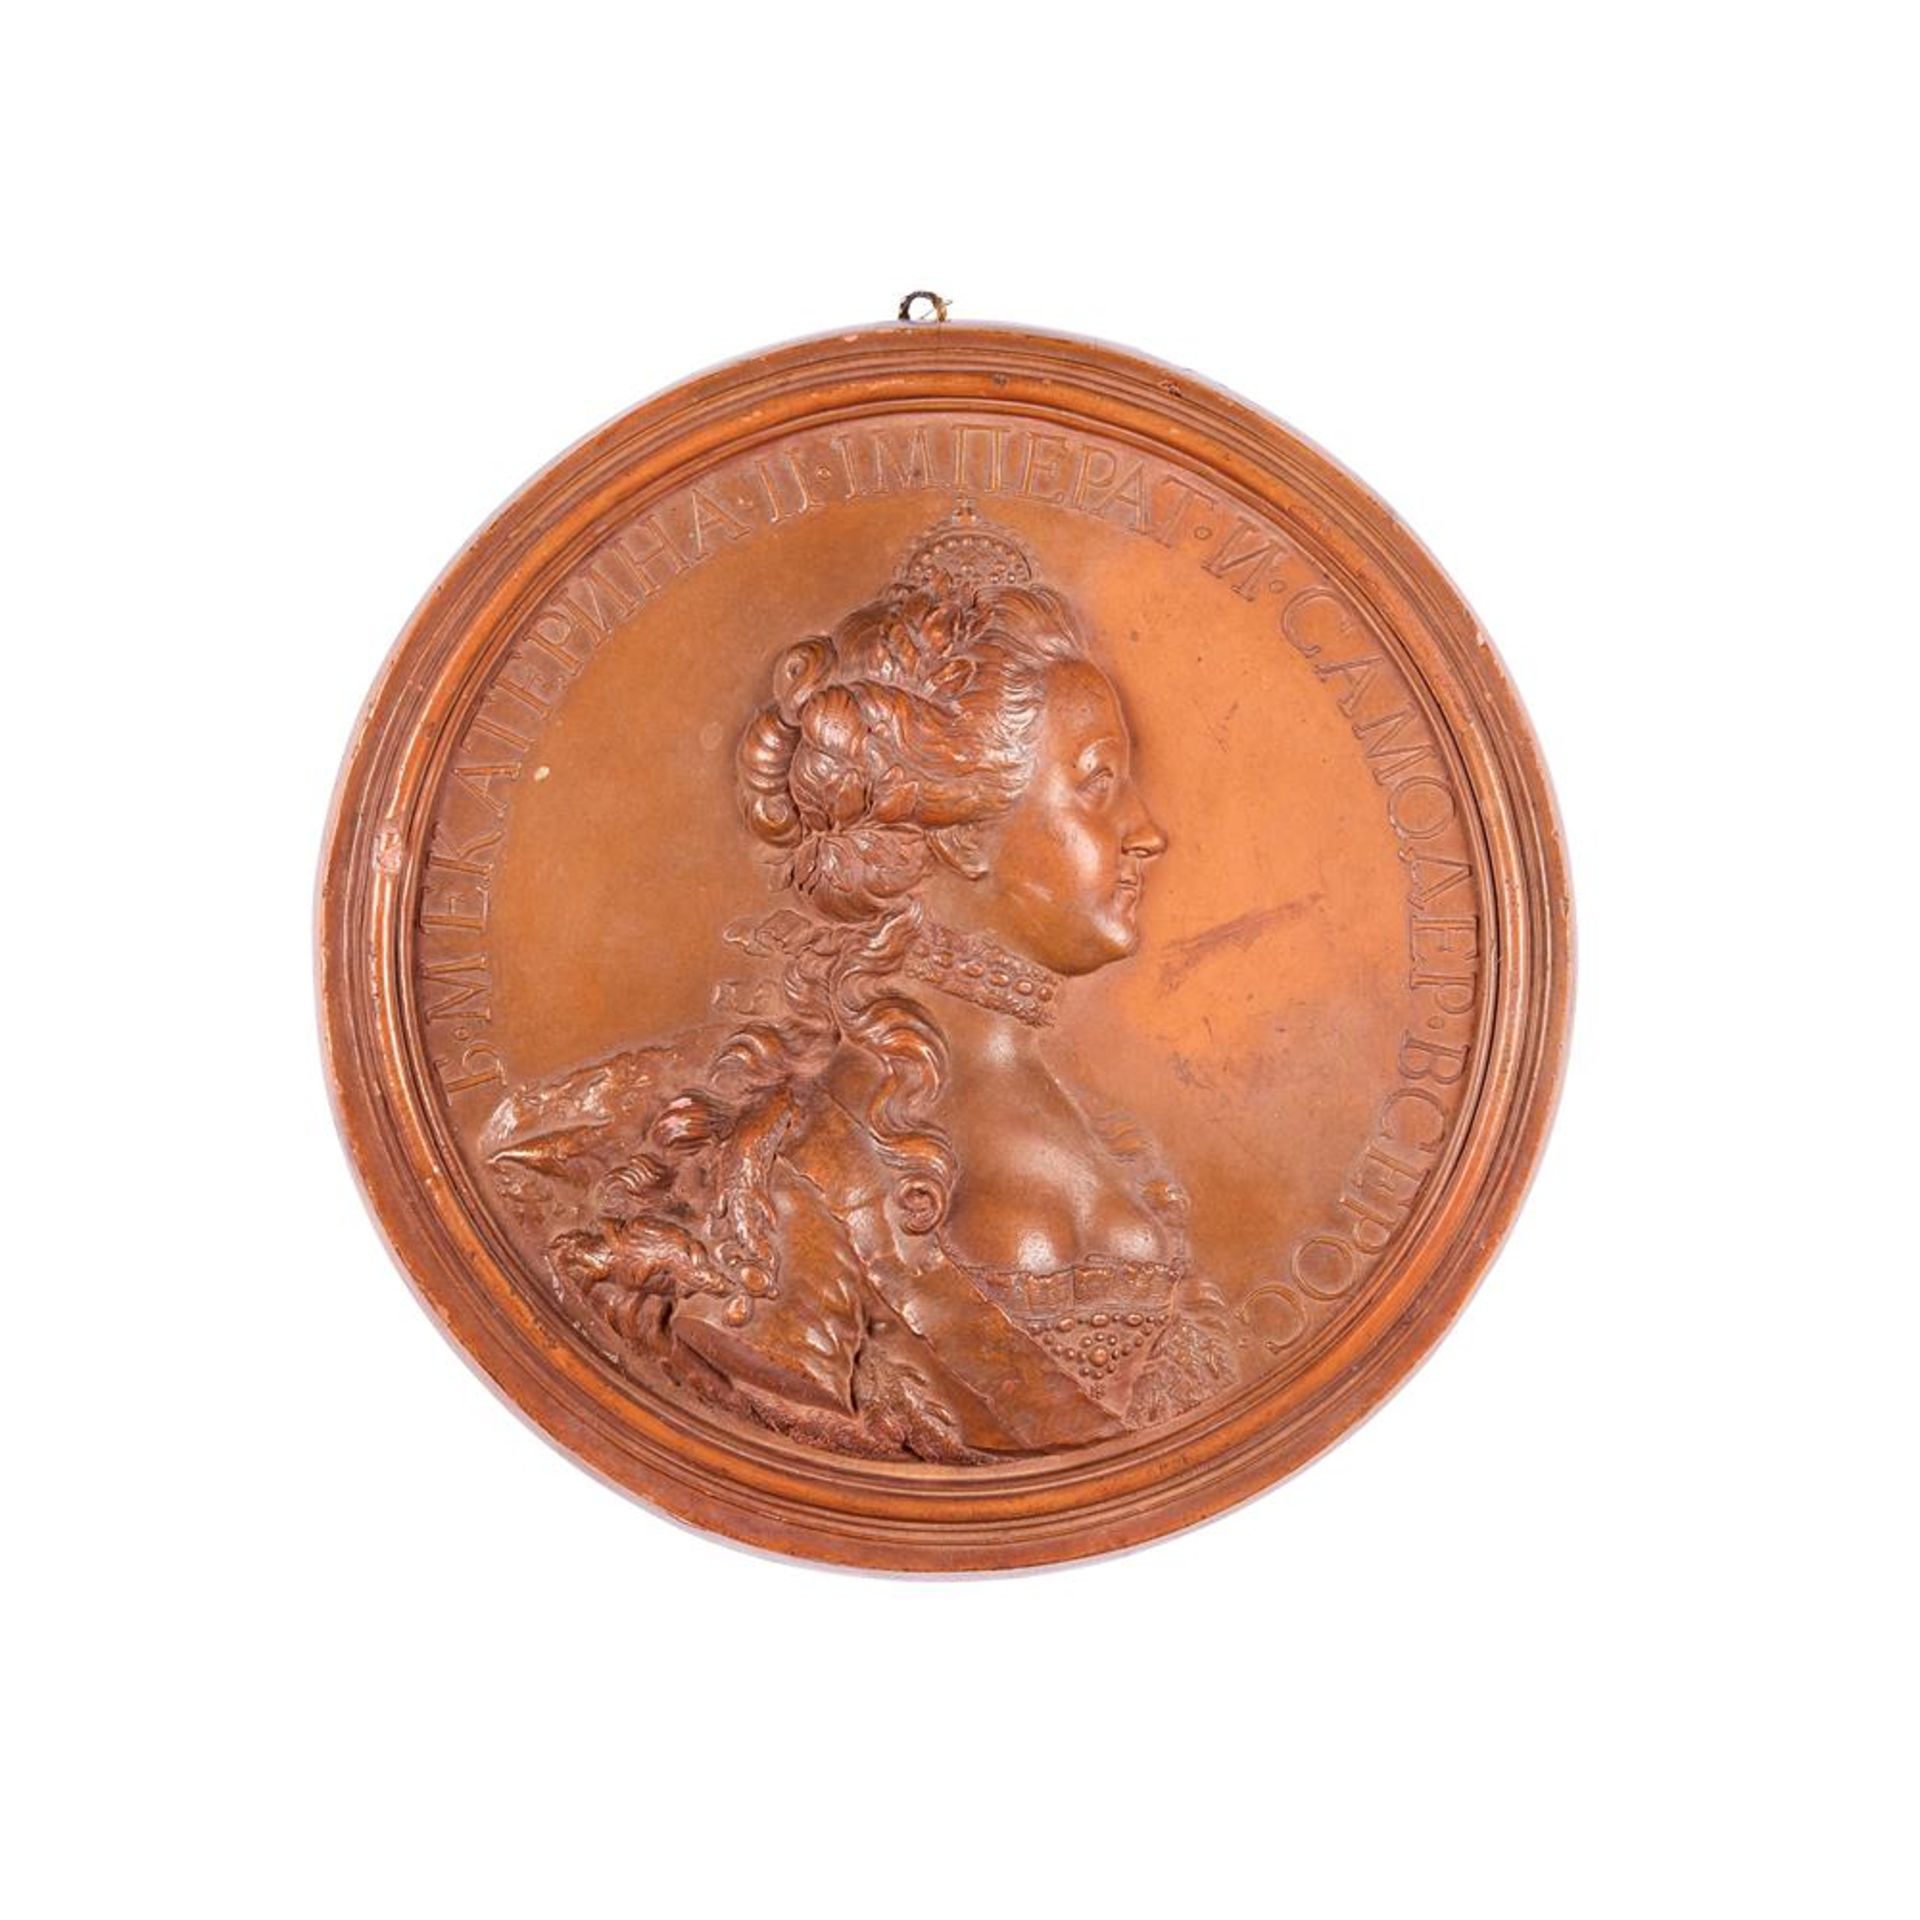 AFTER JEAN-BAPTISTE NINI (1717-1786) AND WORKSHOP- A SET OF THIRTEEN TERRACOTTA MEDALLIONS - Image 9 of 14